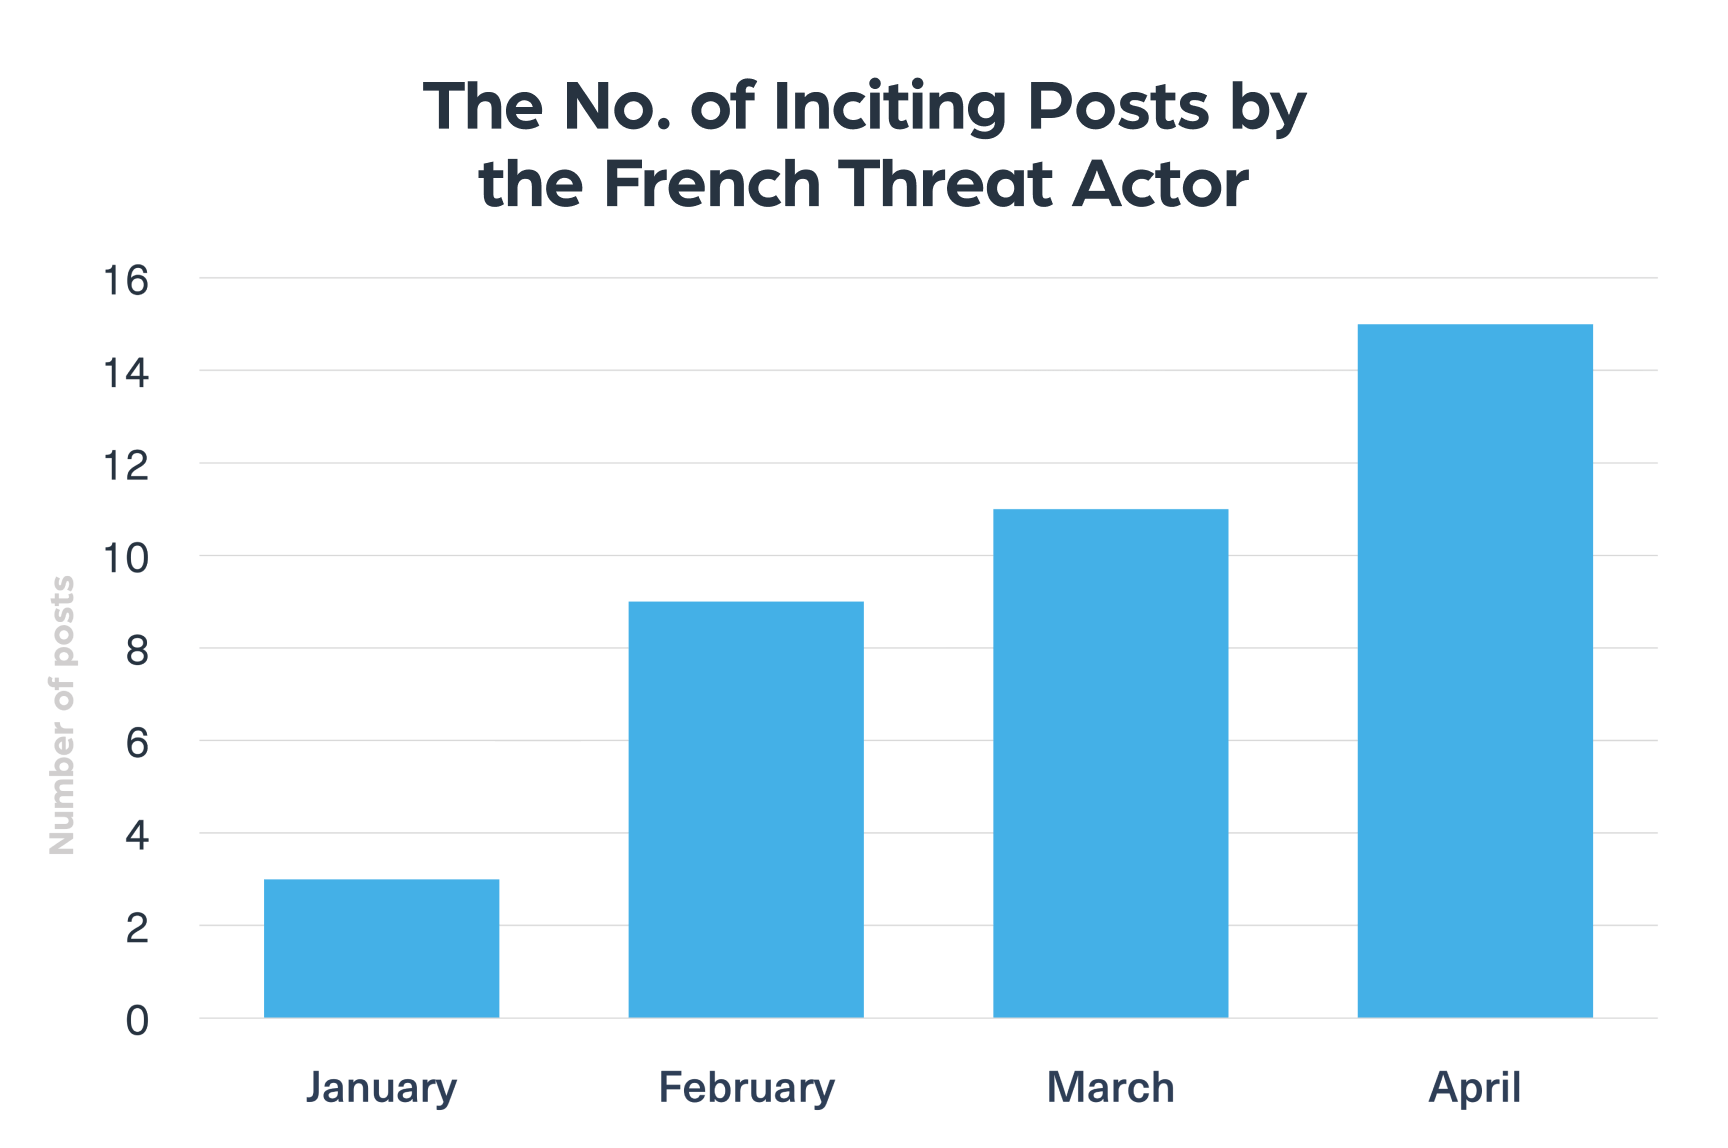 The chart shows that the number of posts written by the French threat actor on the anti-government protests has increased over the last months